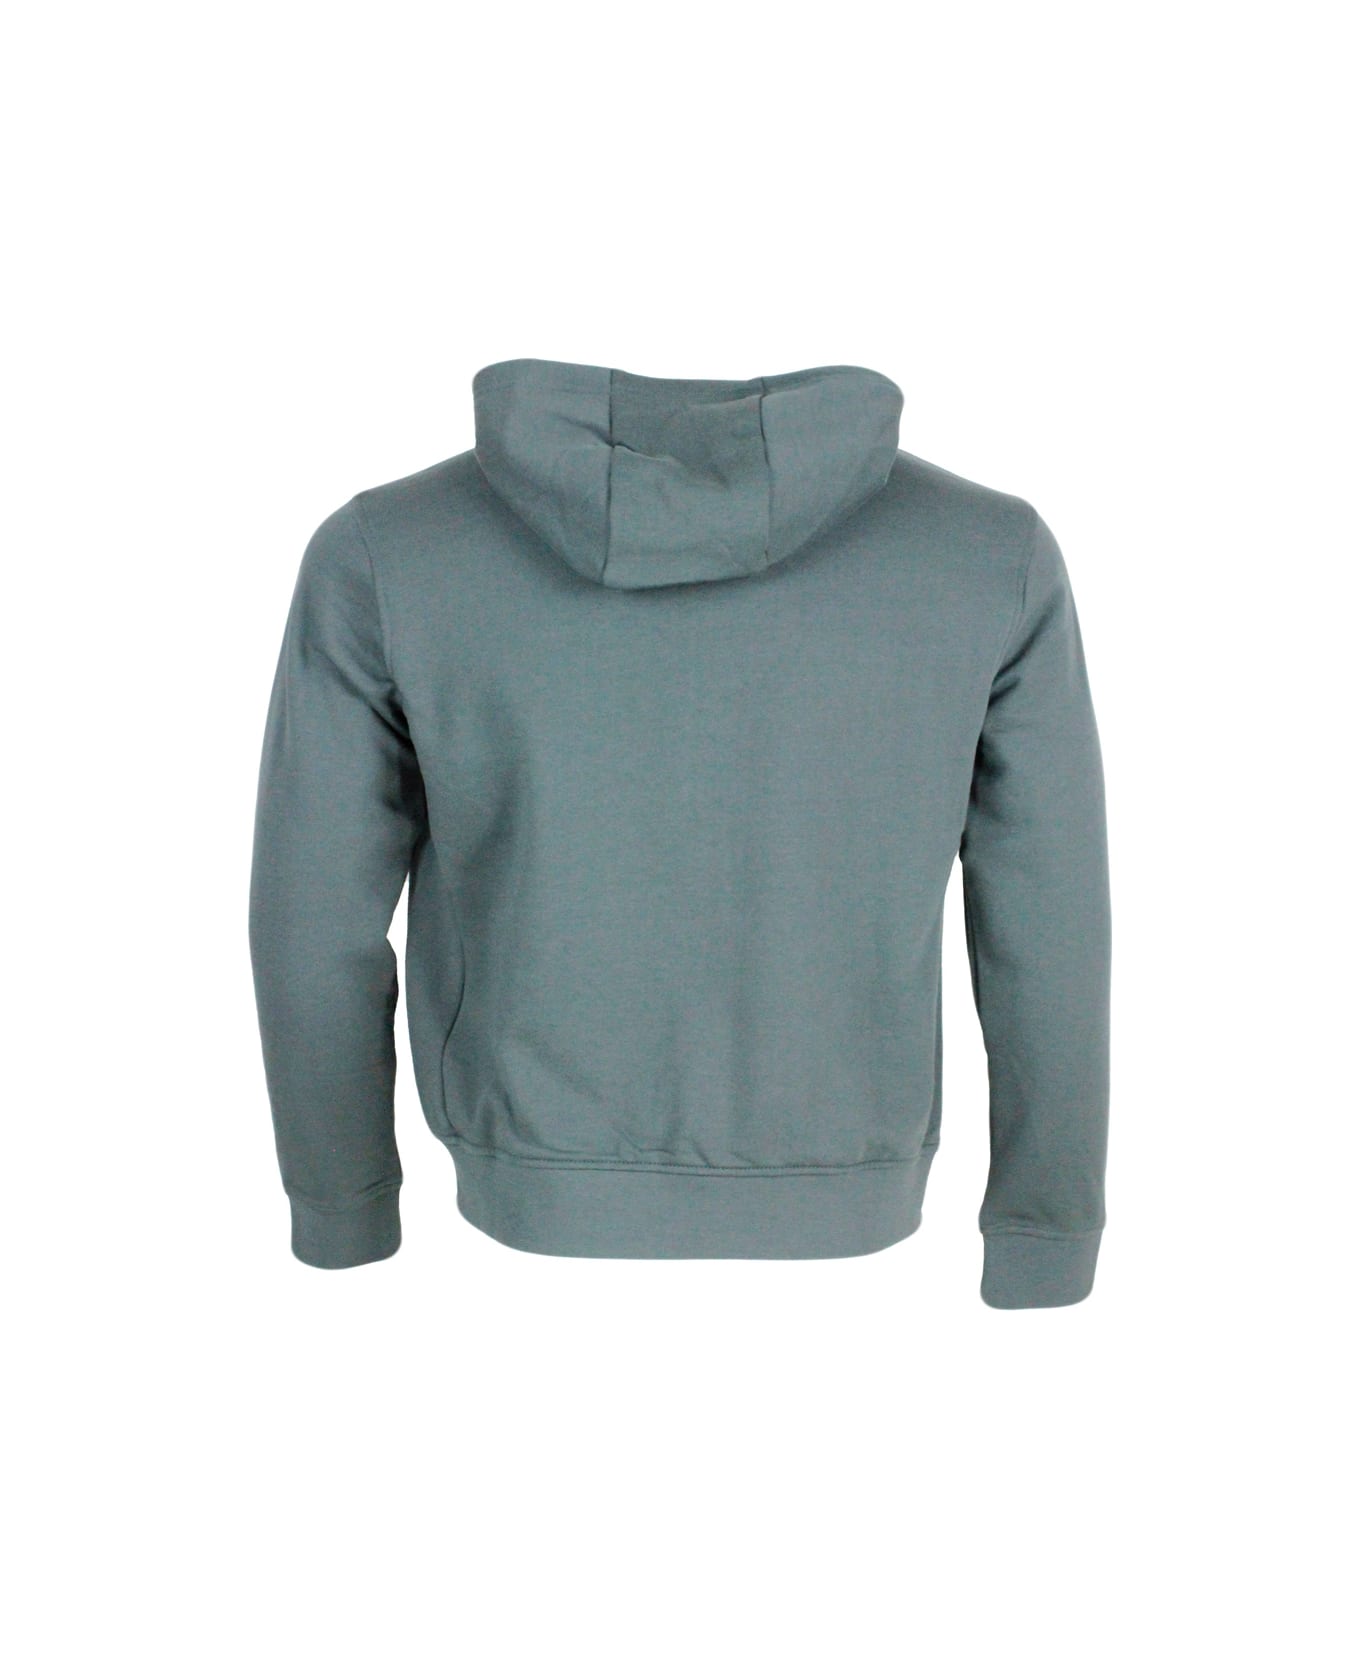 Armani Collezioni Long-sleeved Full Zip Drawstring Hoodie With Small Logo On The Chest - Green ニットウェア